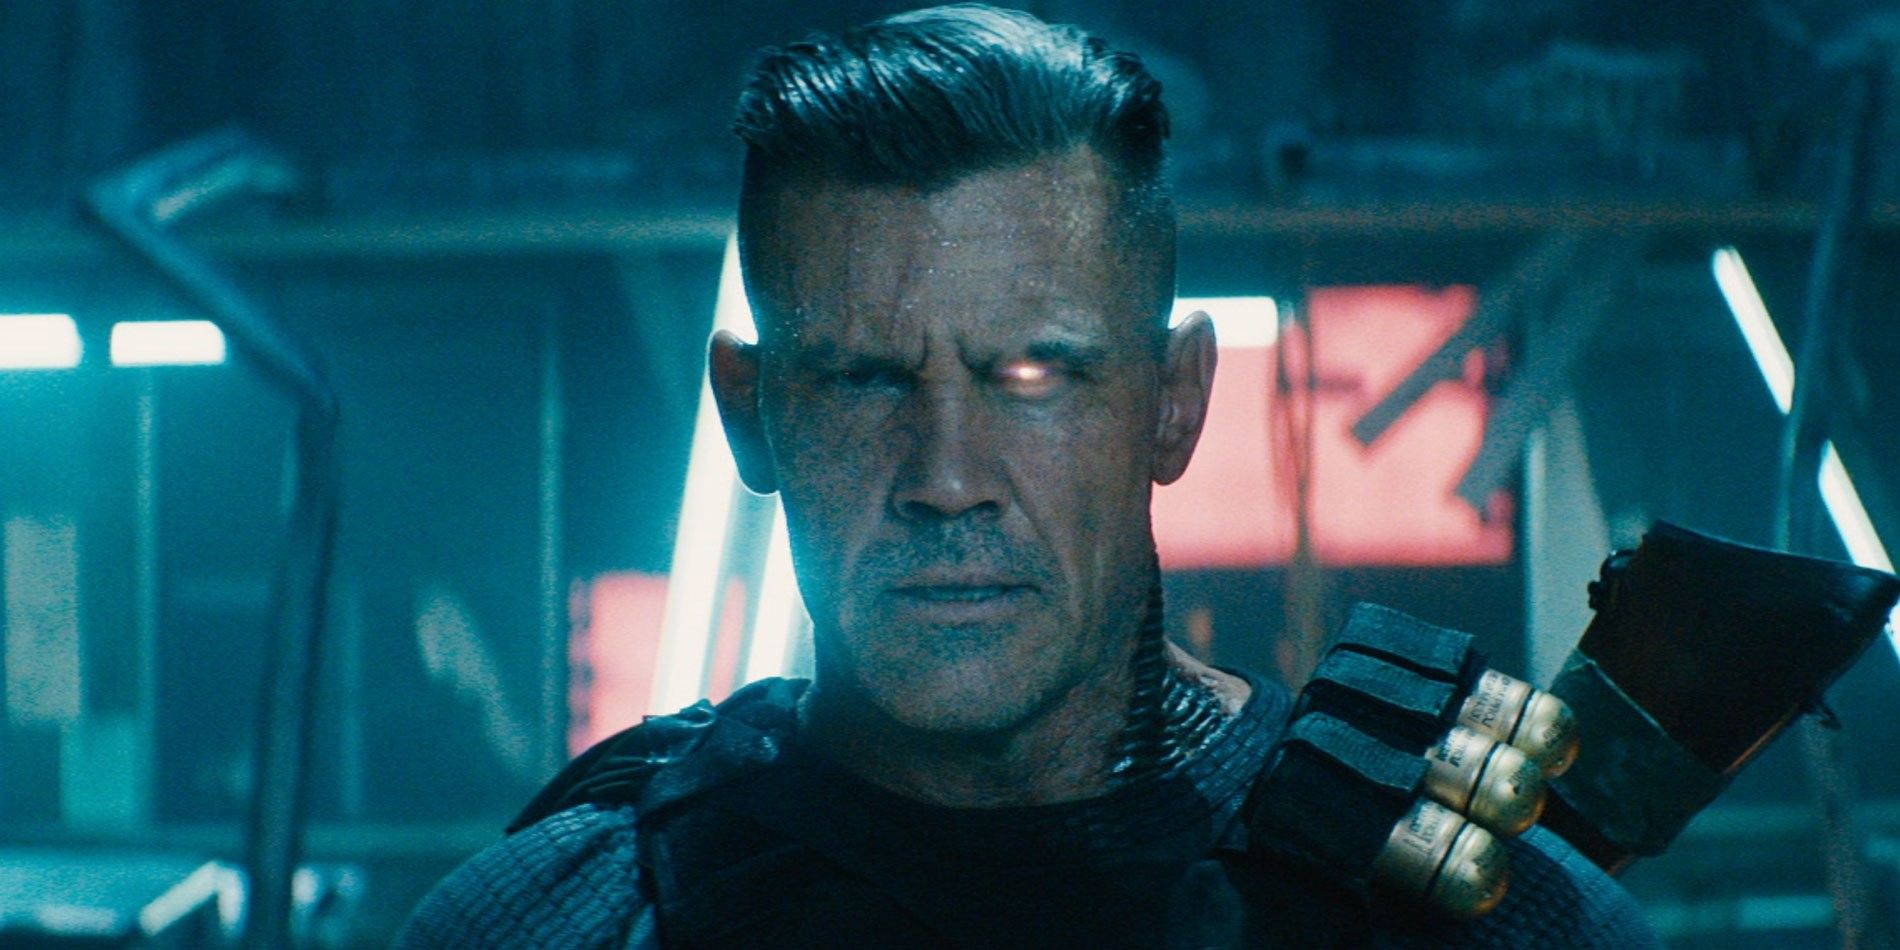 Josh Brolin as Cable with one aye in Deadpool 2